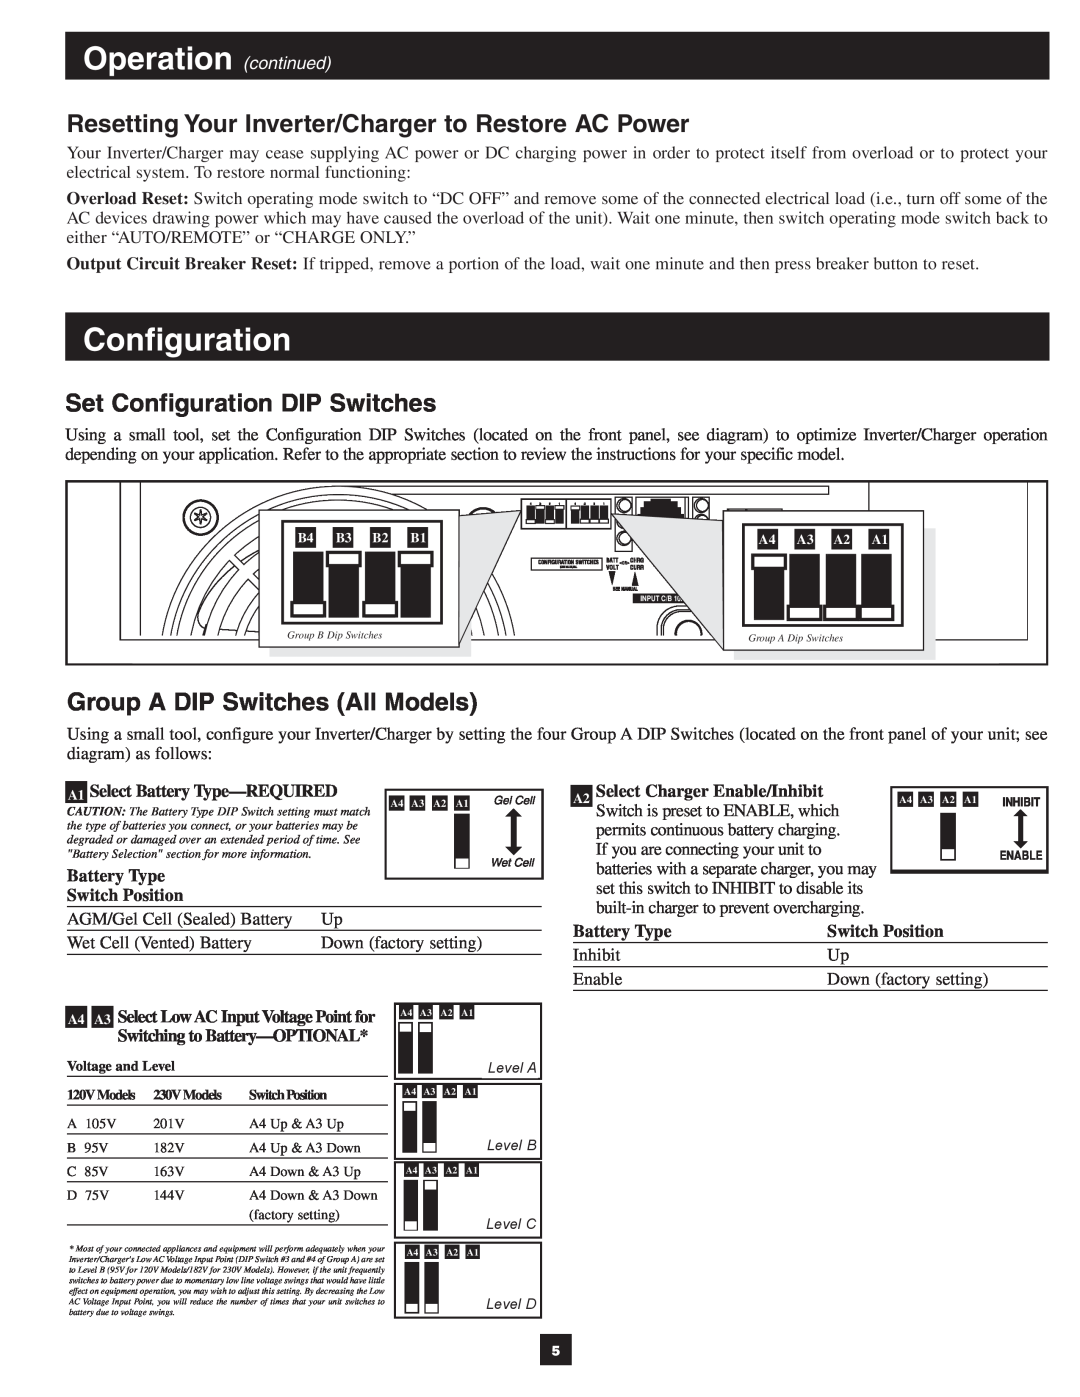 Tripp Lite 200812163 warranty Set Configuration DIP Switches, Group A DIP Switches All Models, Operation continued 